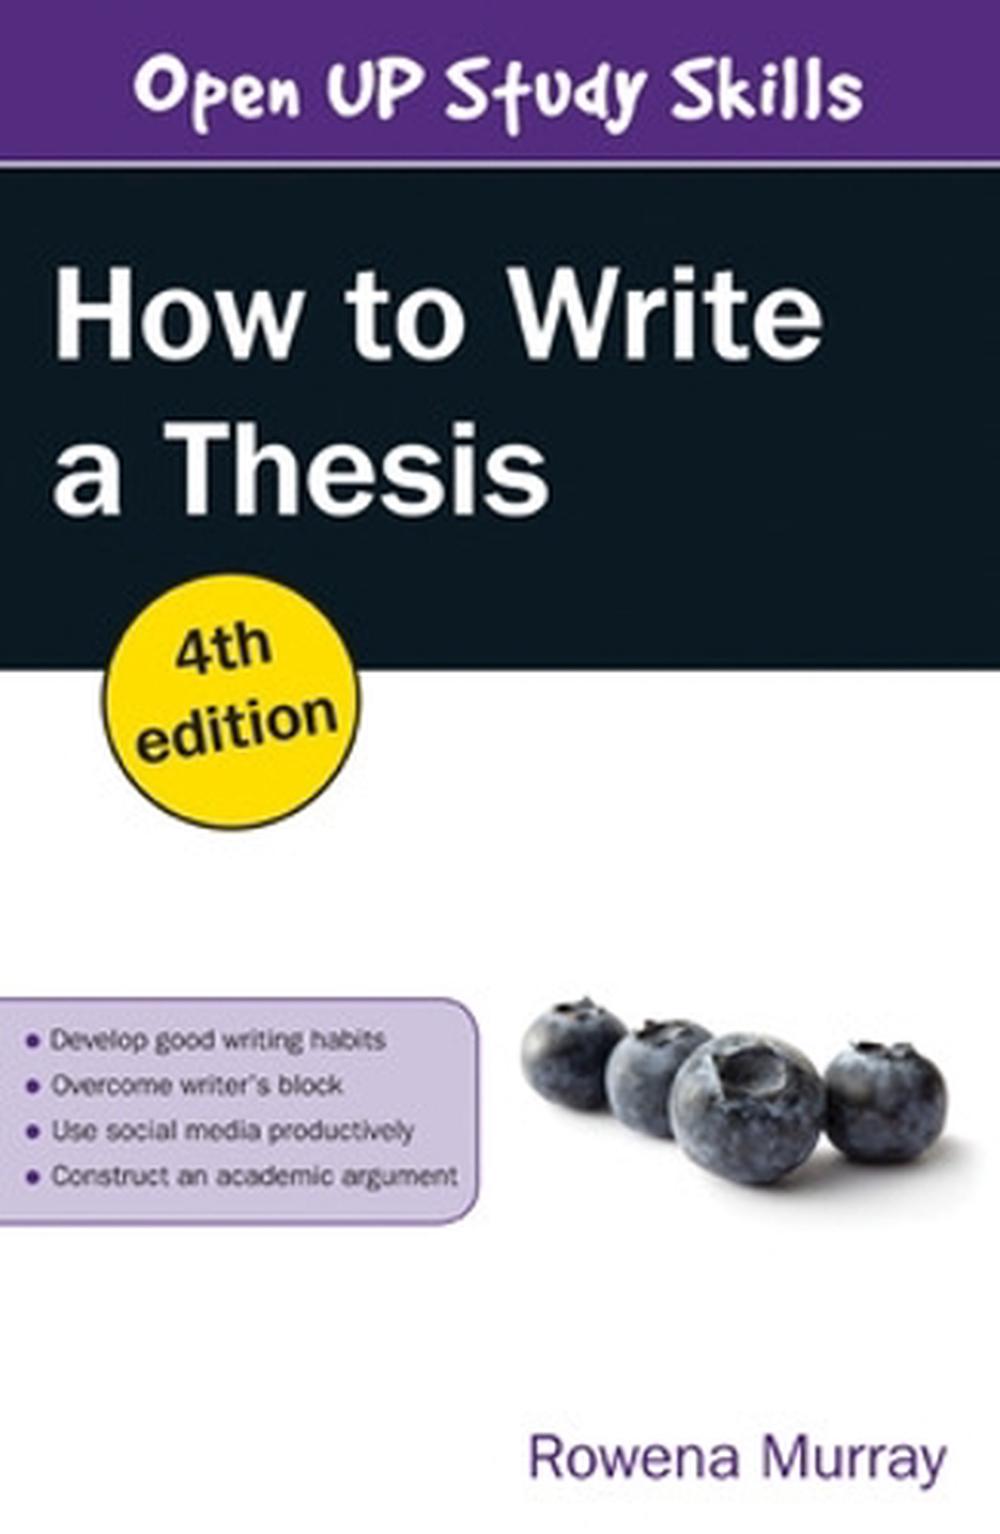 How to Write a Thesis, 26th Edition by Rowena Murray, Paperback